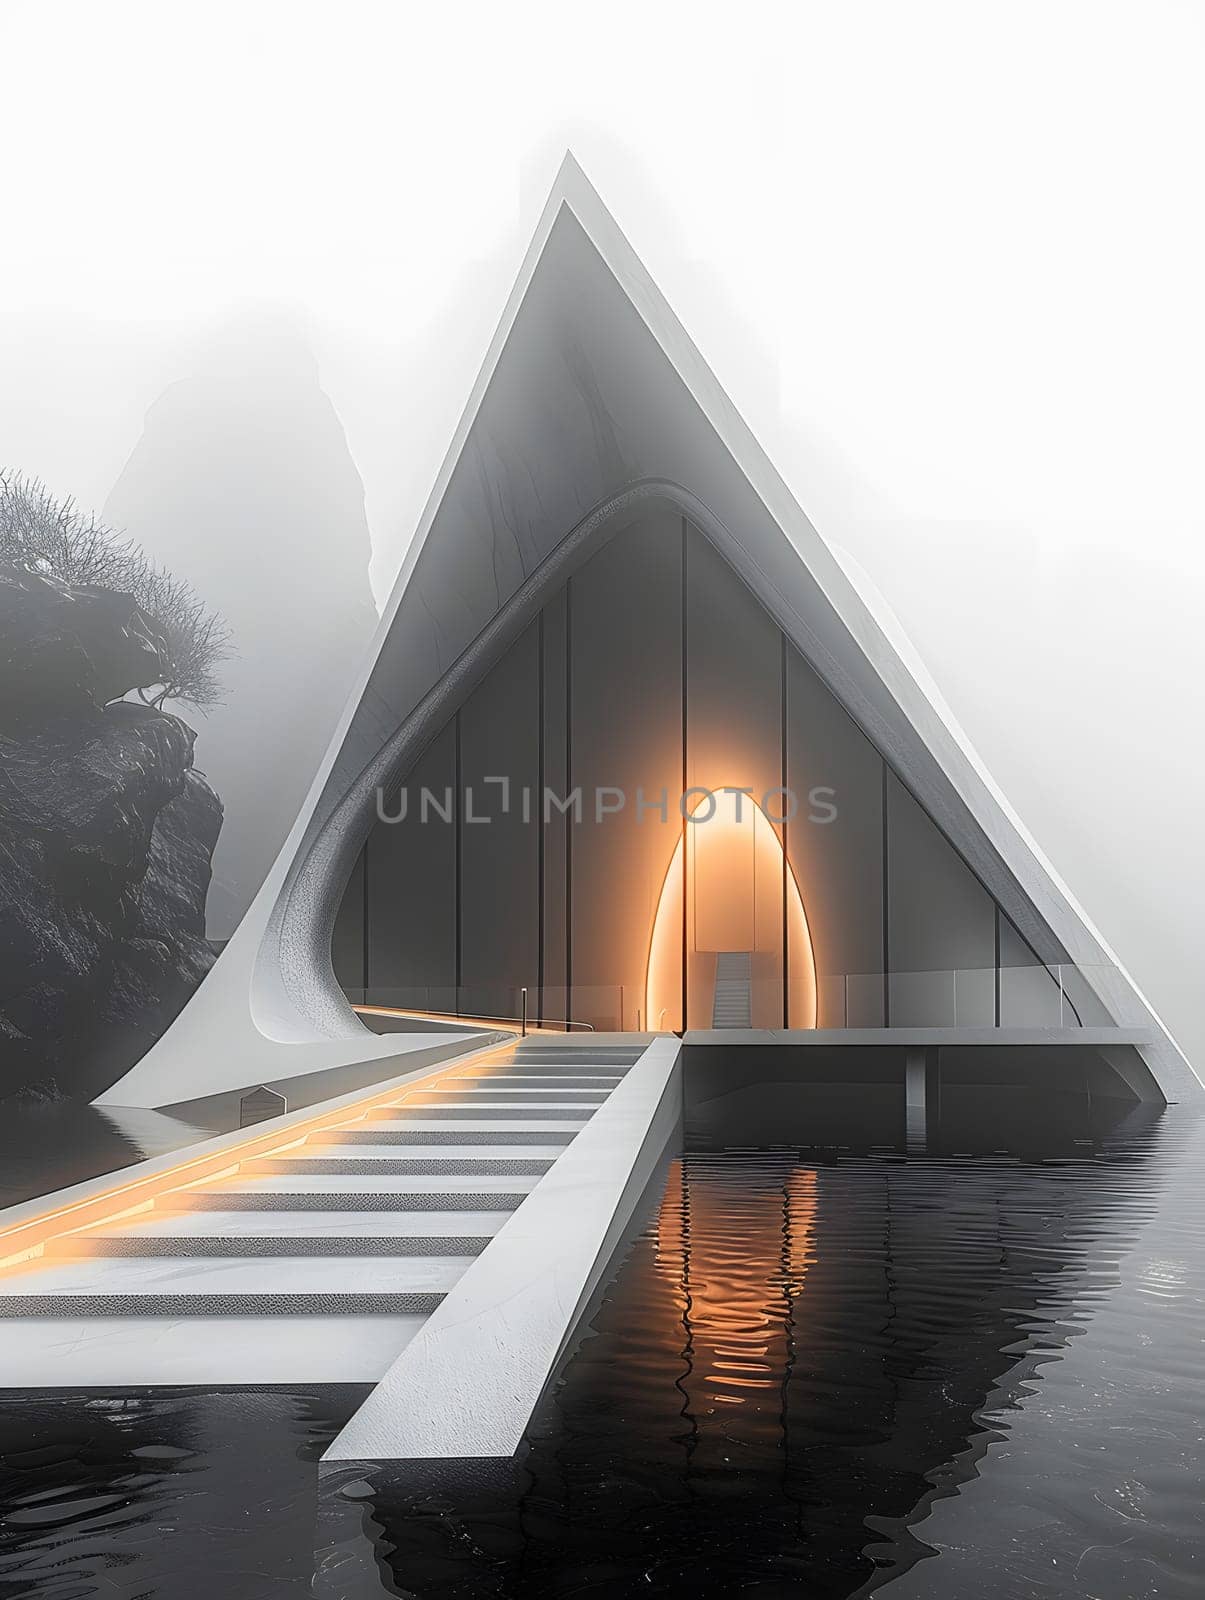 A triangular building sits atop the water, blending into the landscape with its symmetrical facade and shaded roof, creating a serene and unique structure